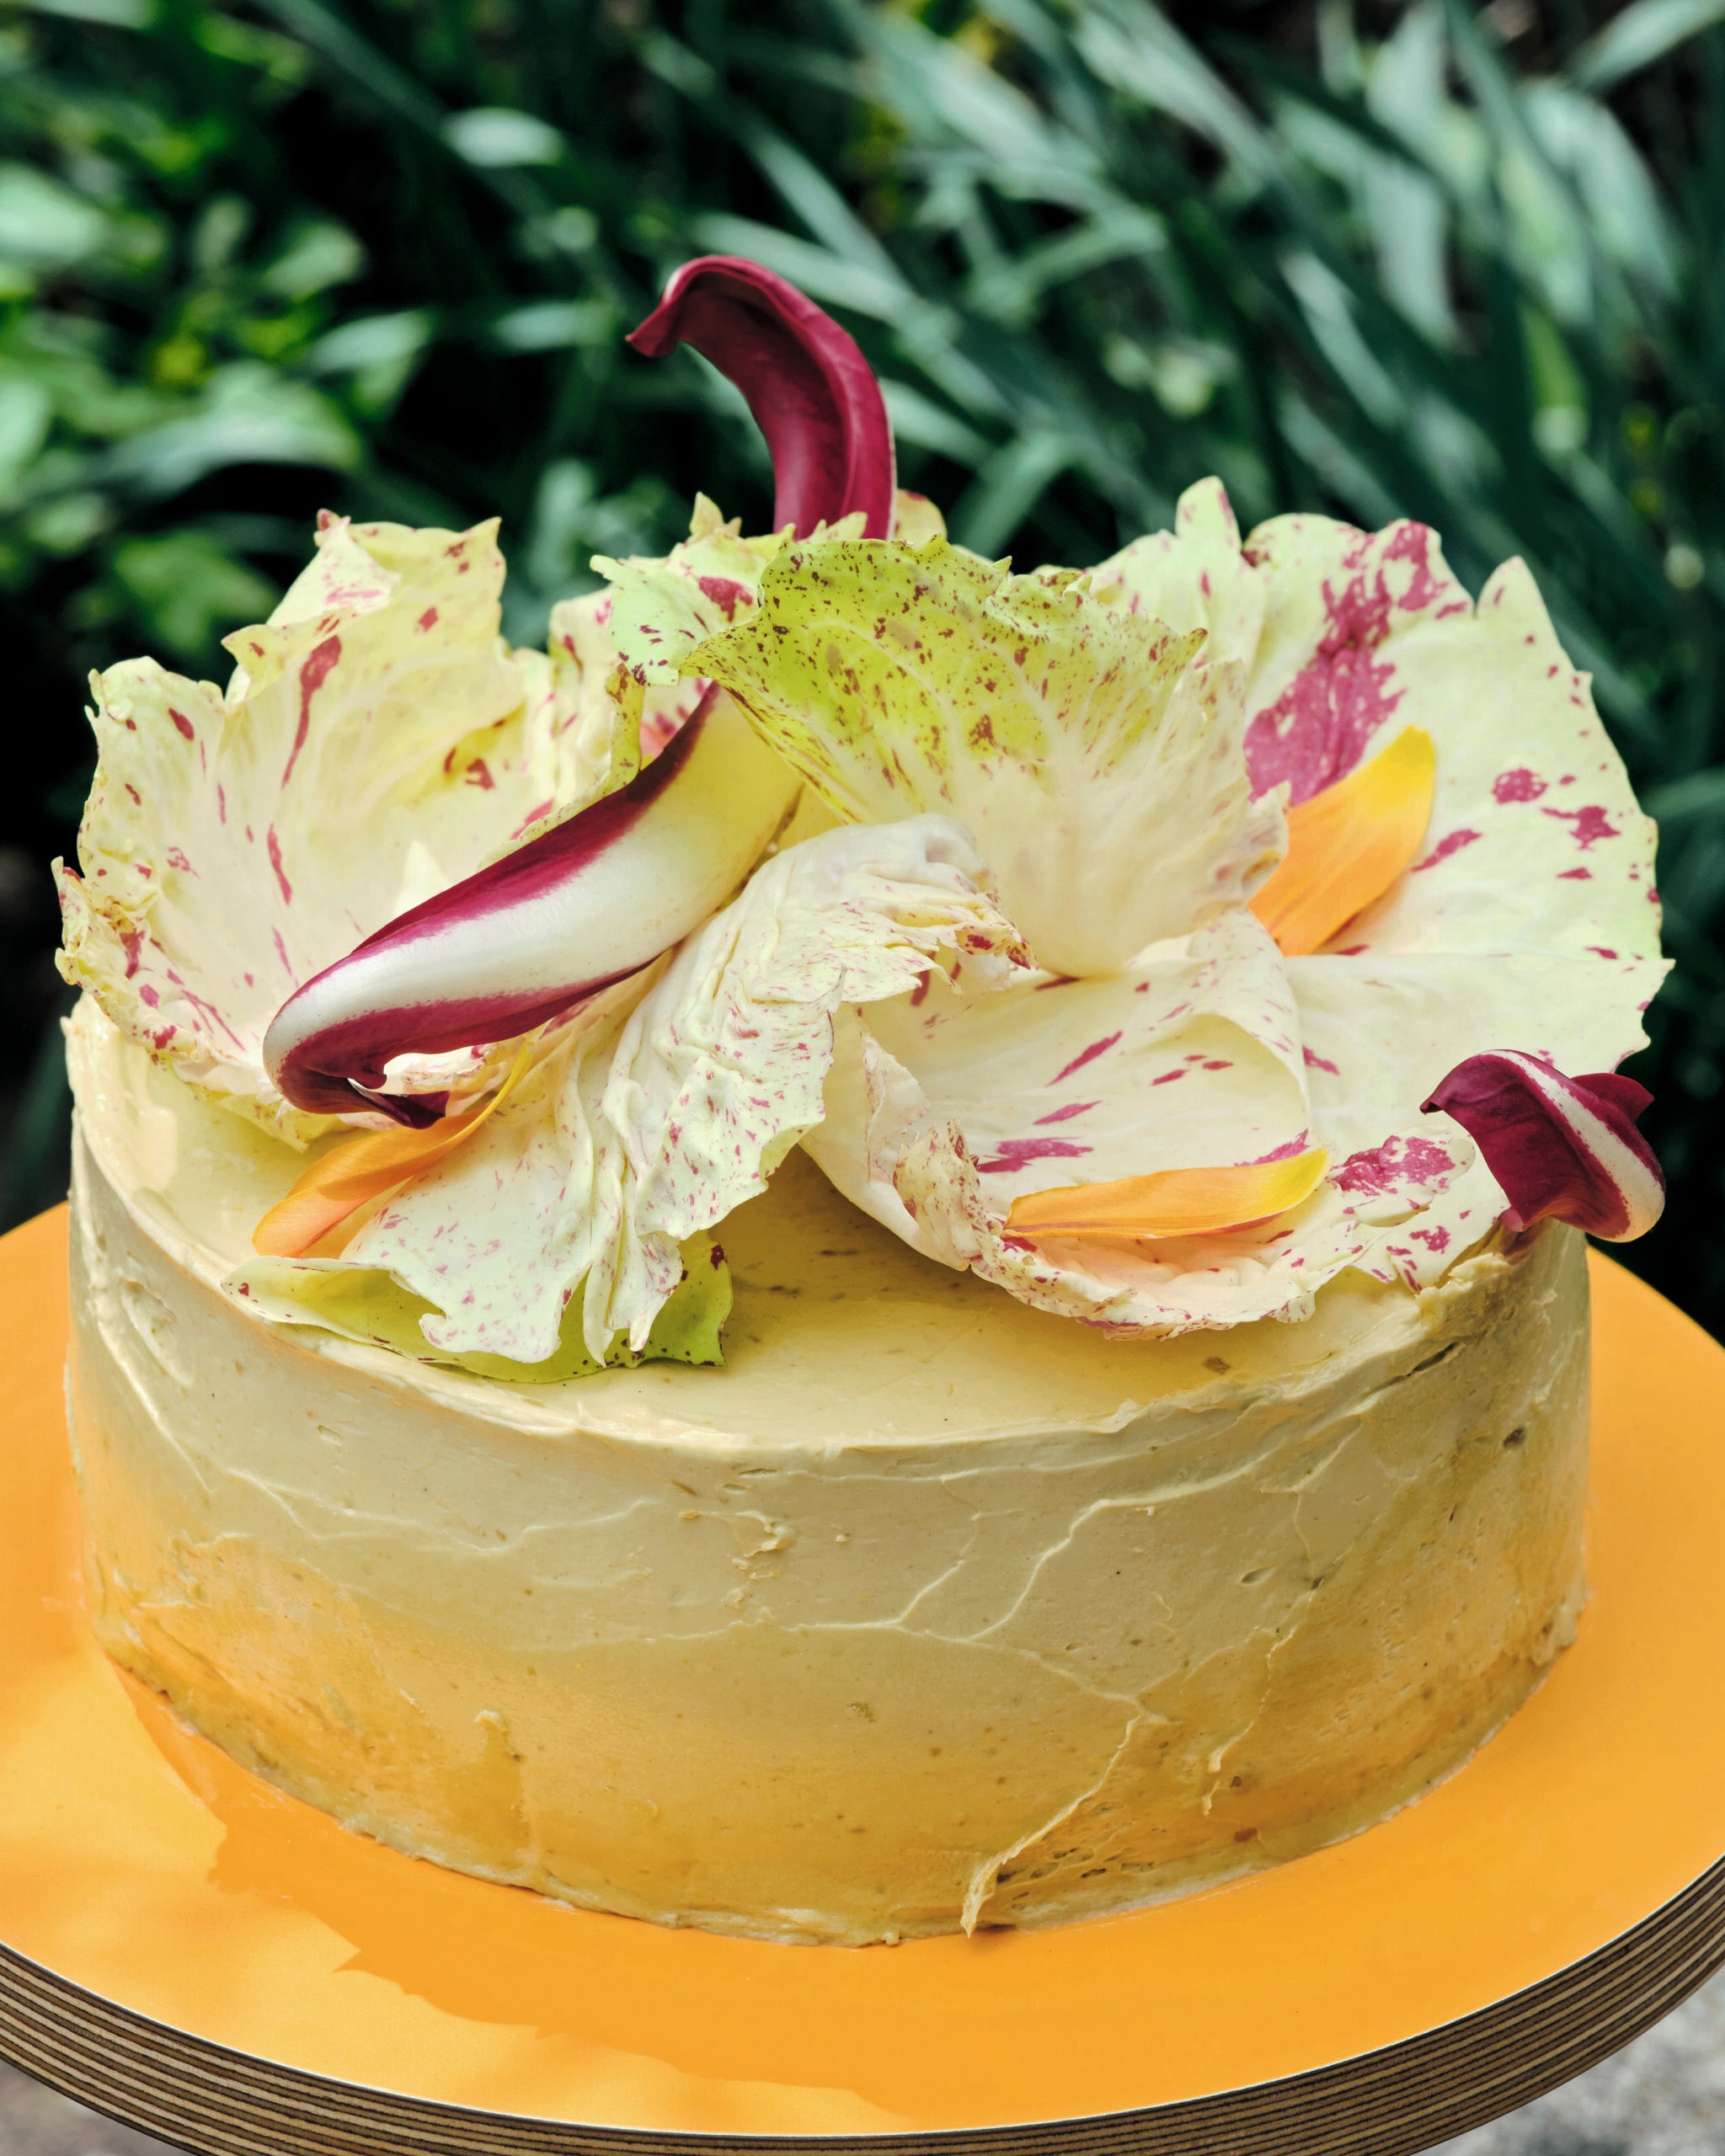 00 LEAD p.146 Olive Oil Mascarpone and Fennel Layer Cake. MORE THAN CAKE by Natasha Pickowicz scaled